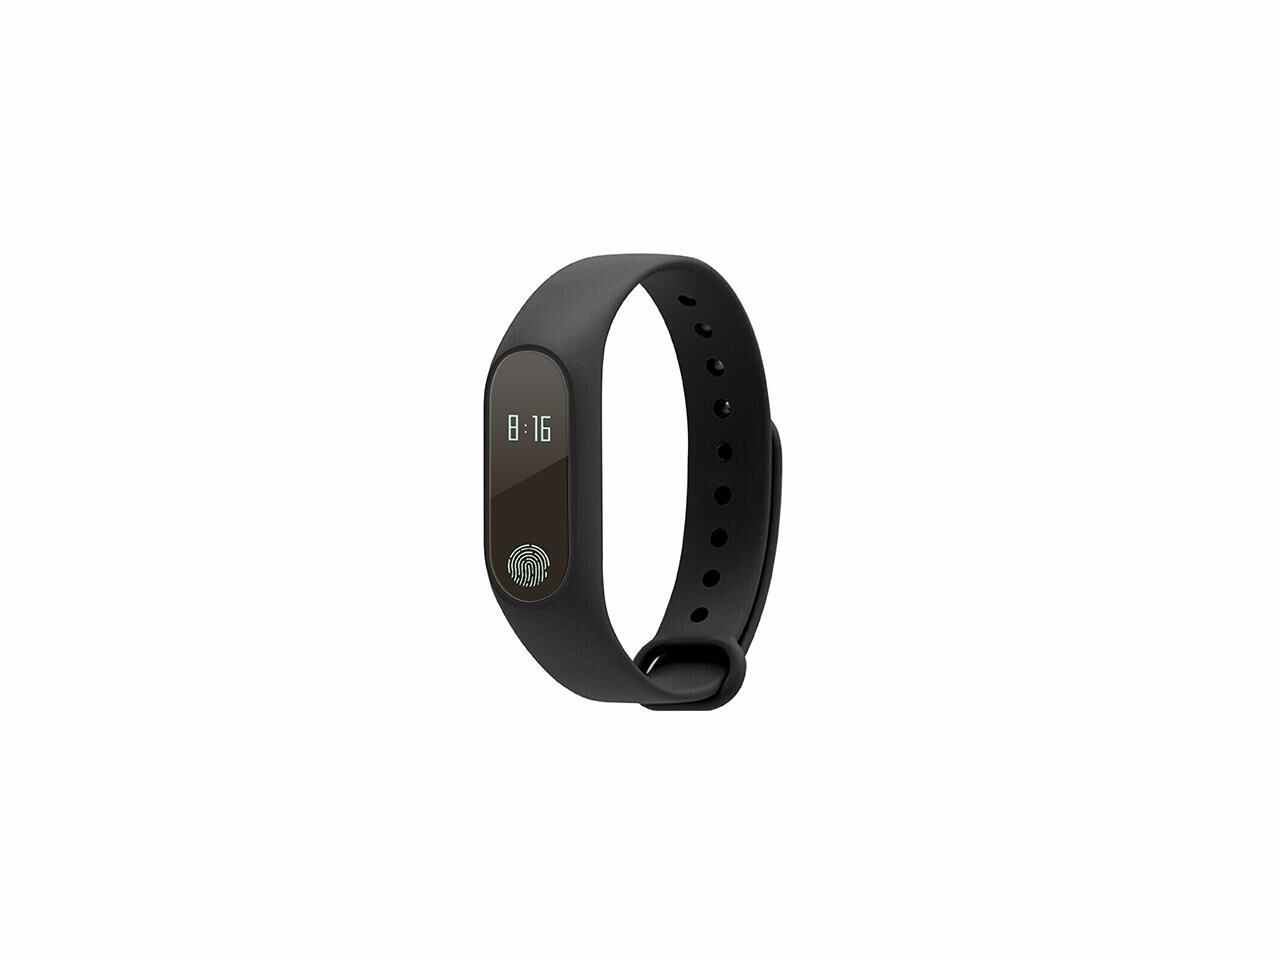 GuiWoo M2 Heart Rate Smart Wristbands Band Smart Bracelet Bluetooth 4.0 Smartband with Sleep Monitor For iOS Android (Black)